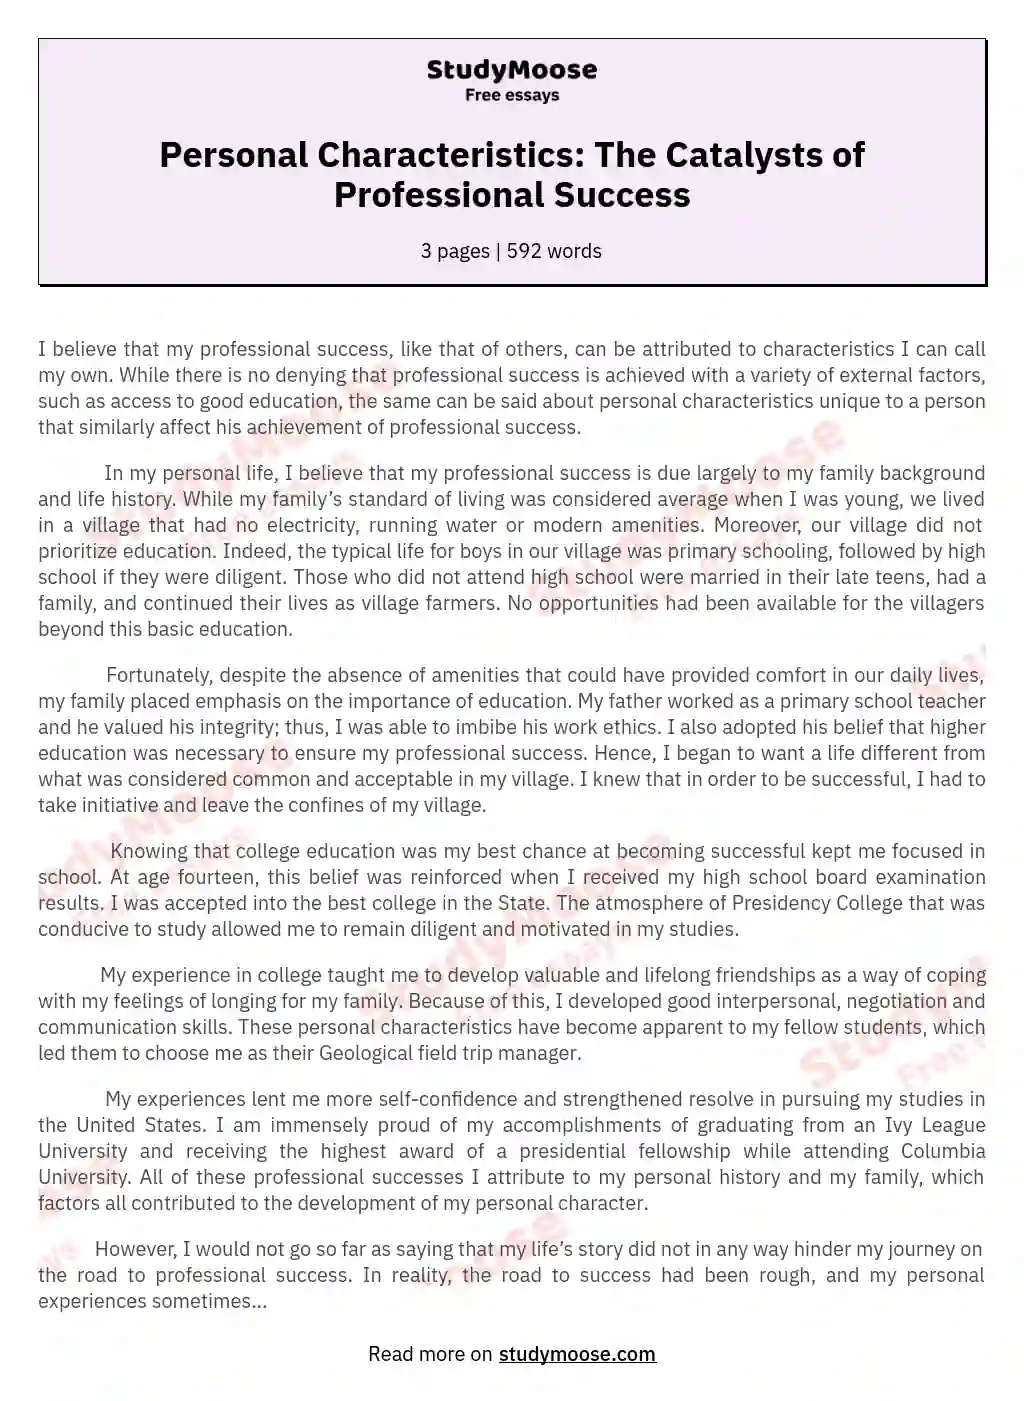 sample essay about professionalism